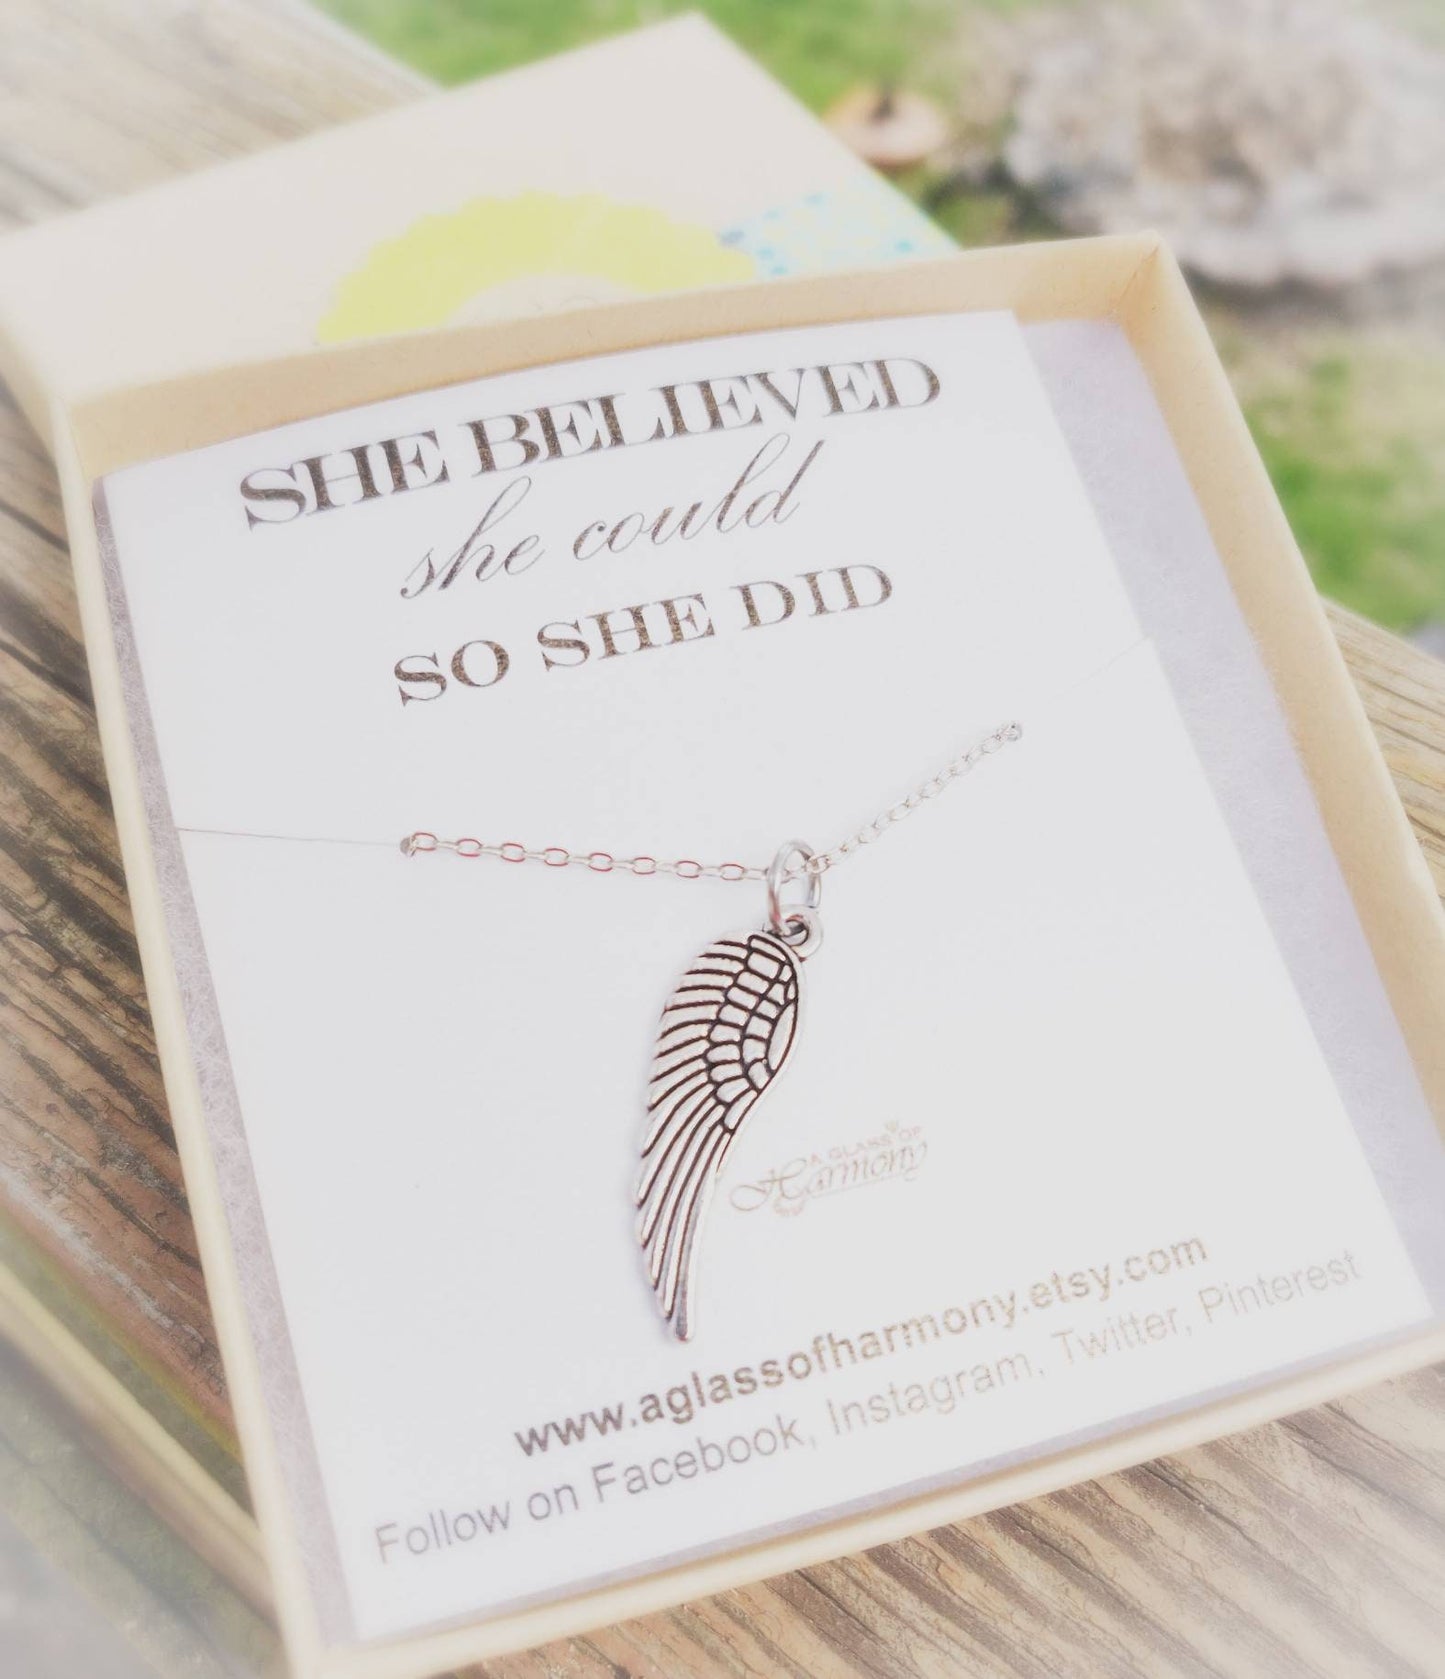 She Believed She Could So She Did - Graduation Necklace, Graduation Jewelry, Gift for grad, Wing Necklace, Graduation gift for her